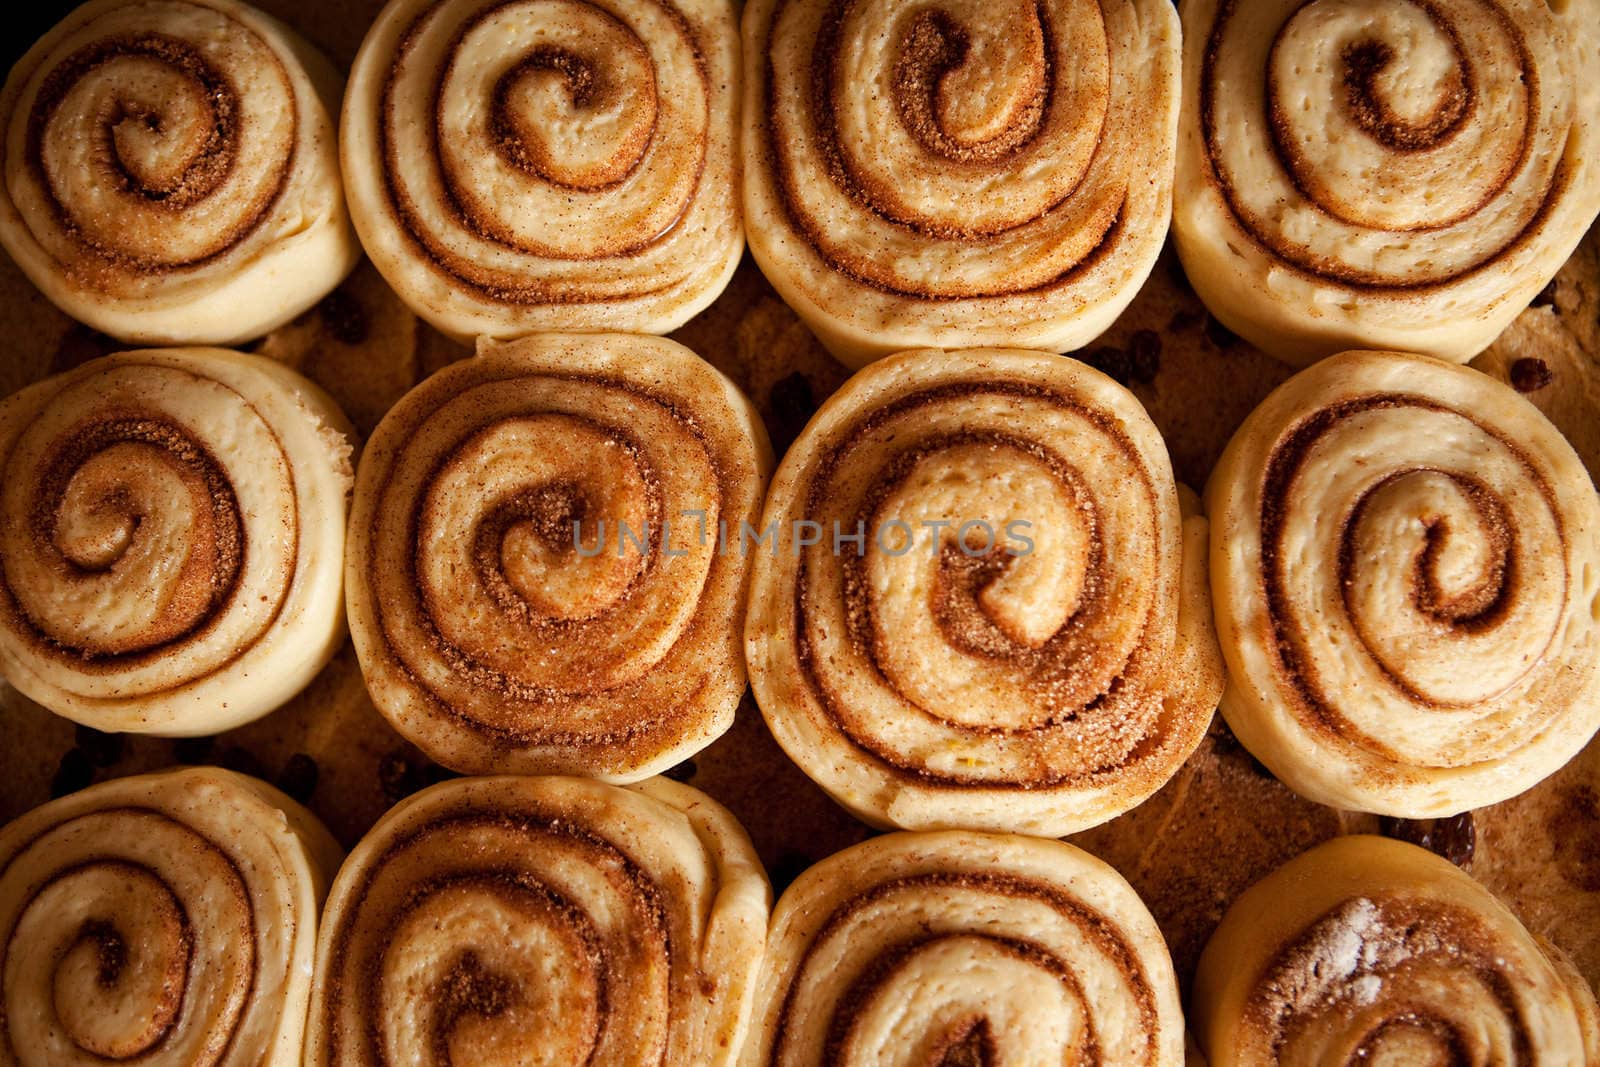 A pan of uncooked cinnamon buns ready for the oven